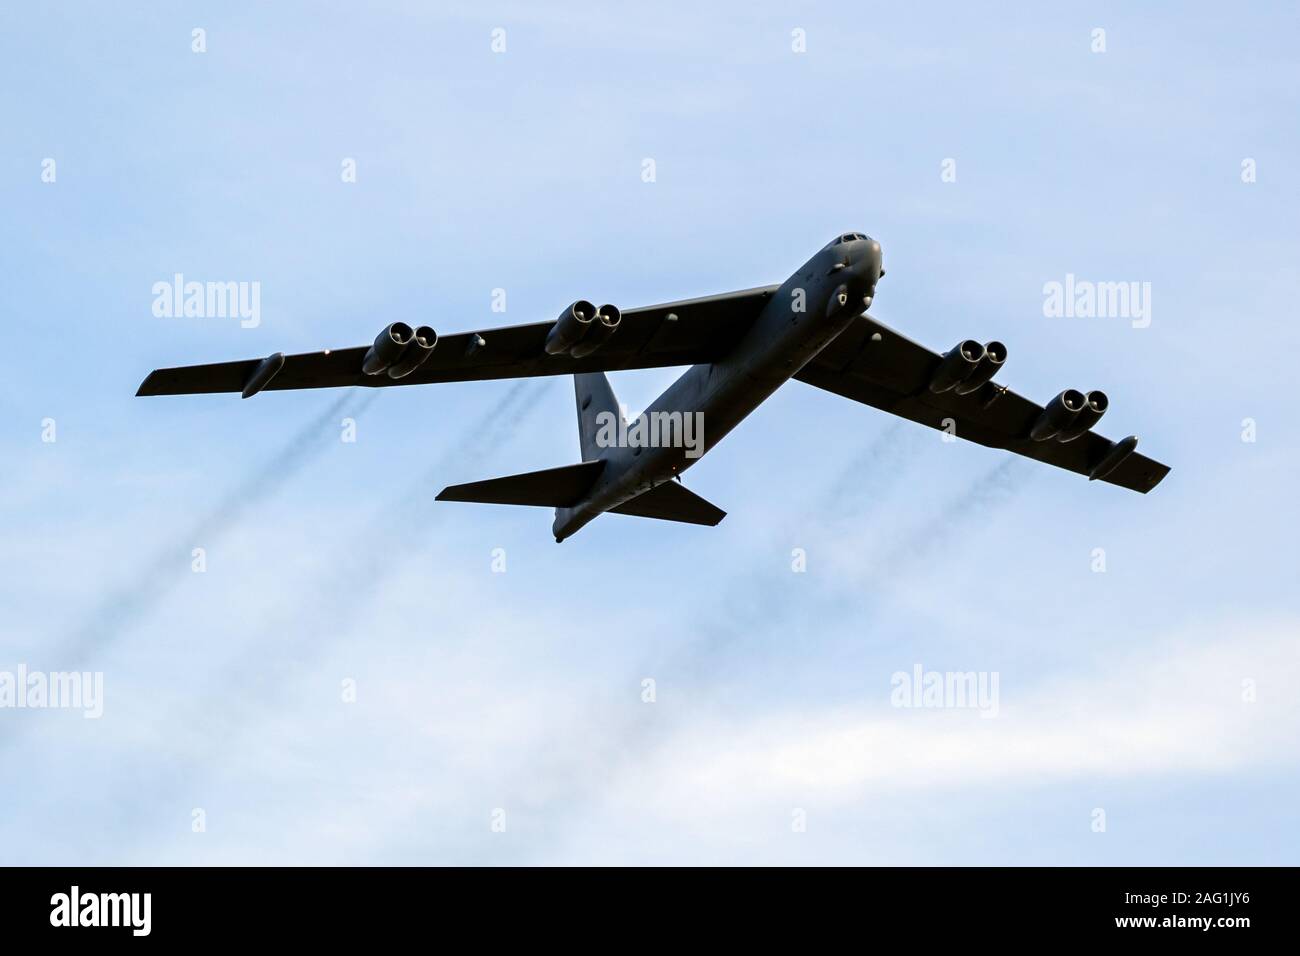 SANICOLE, BELGIUM - SEP 13, 2019: US Air Force Boeing B-52 Stratofortress bomer plane performing a low-pass at the Sanice Sunset Airshow. Stock Photo